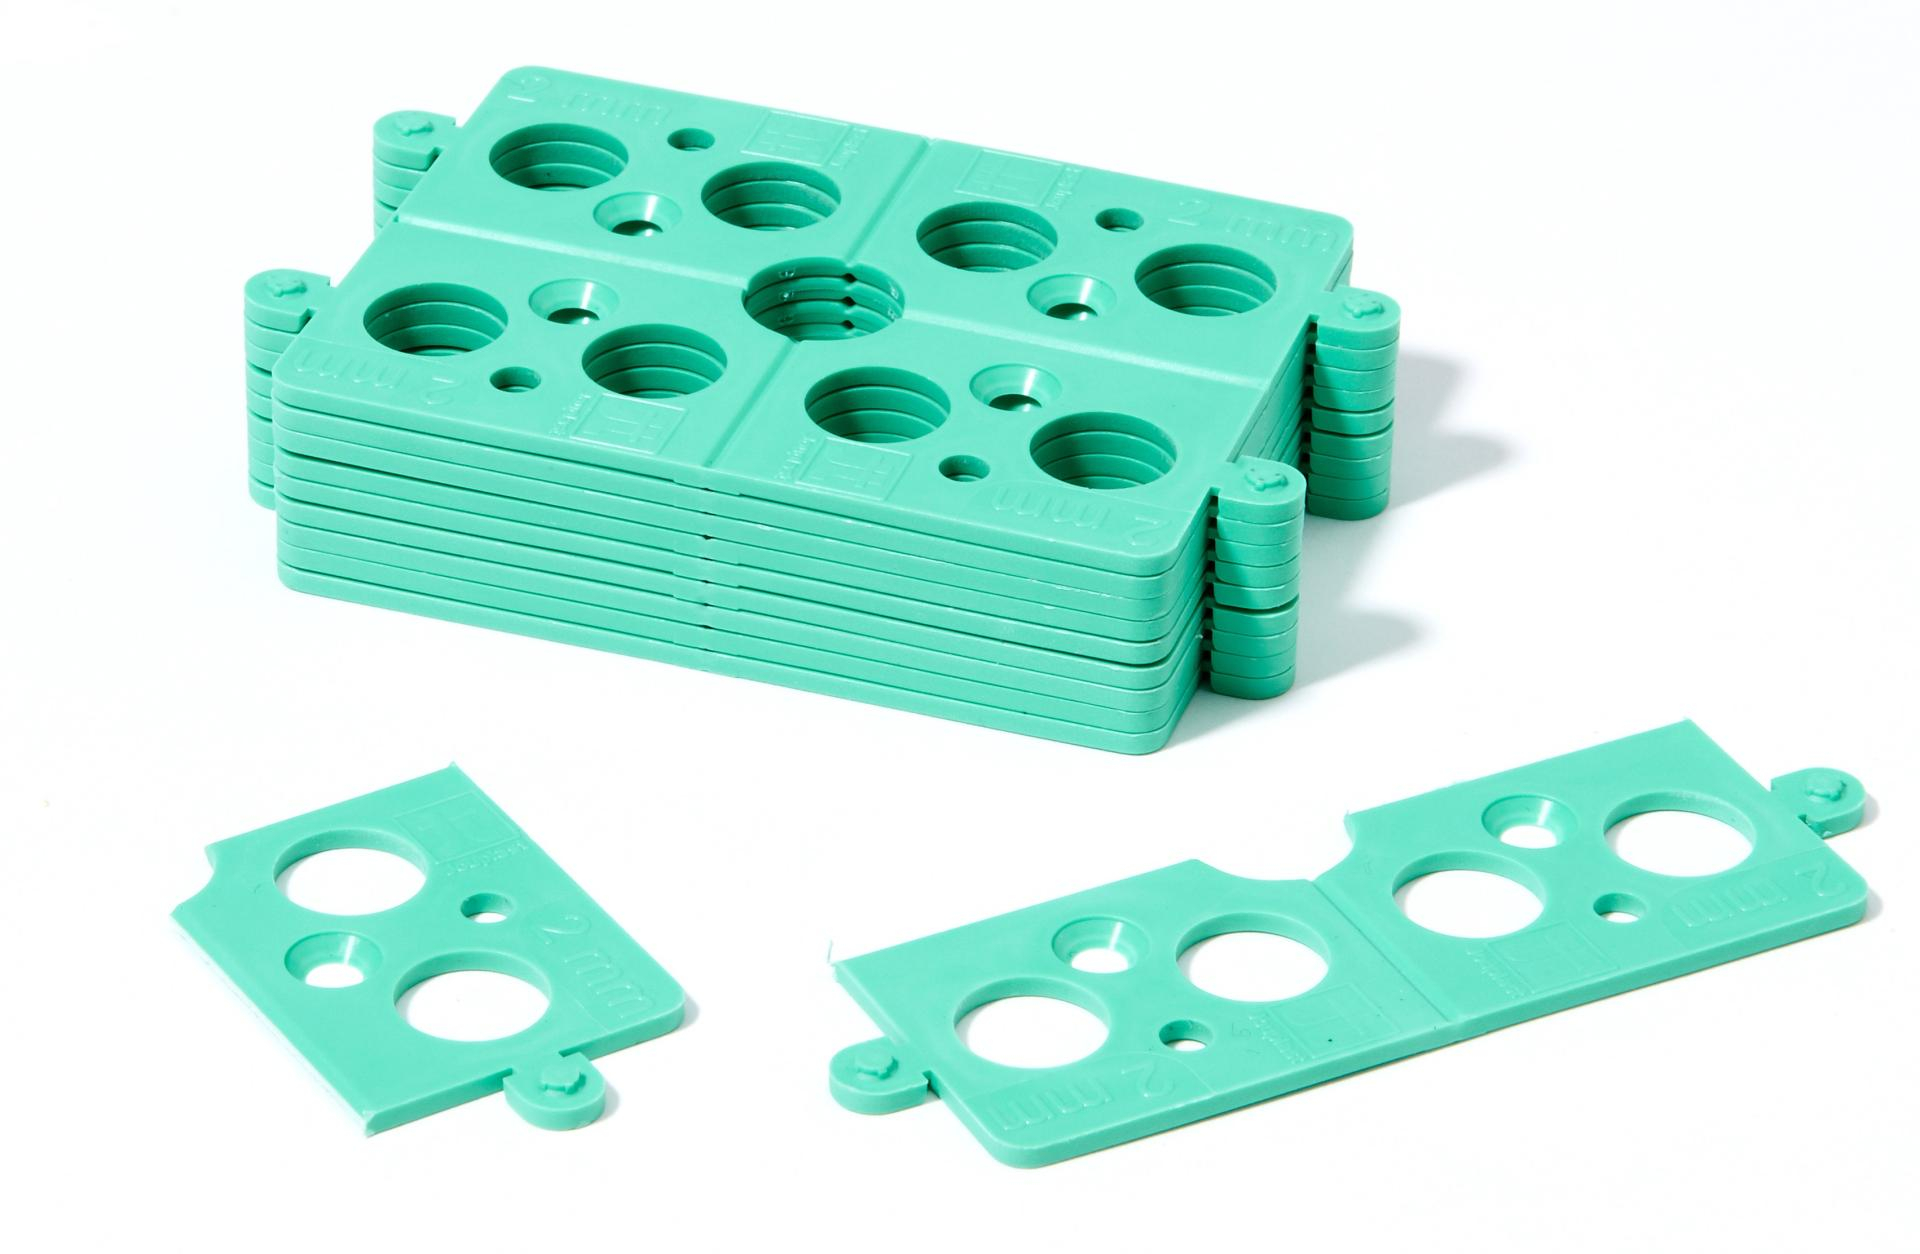 cale-plate-secable-superpos-empilable-2mm-vert-40-sch-joup-0